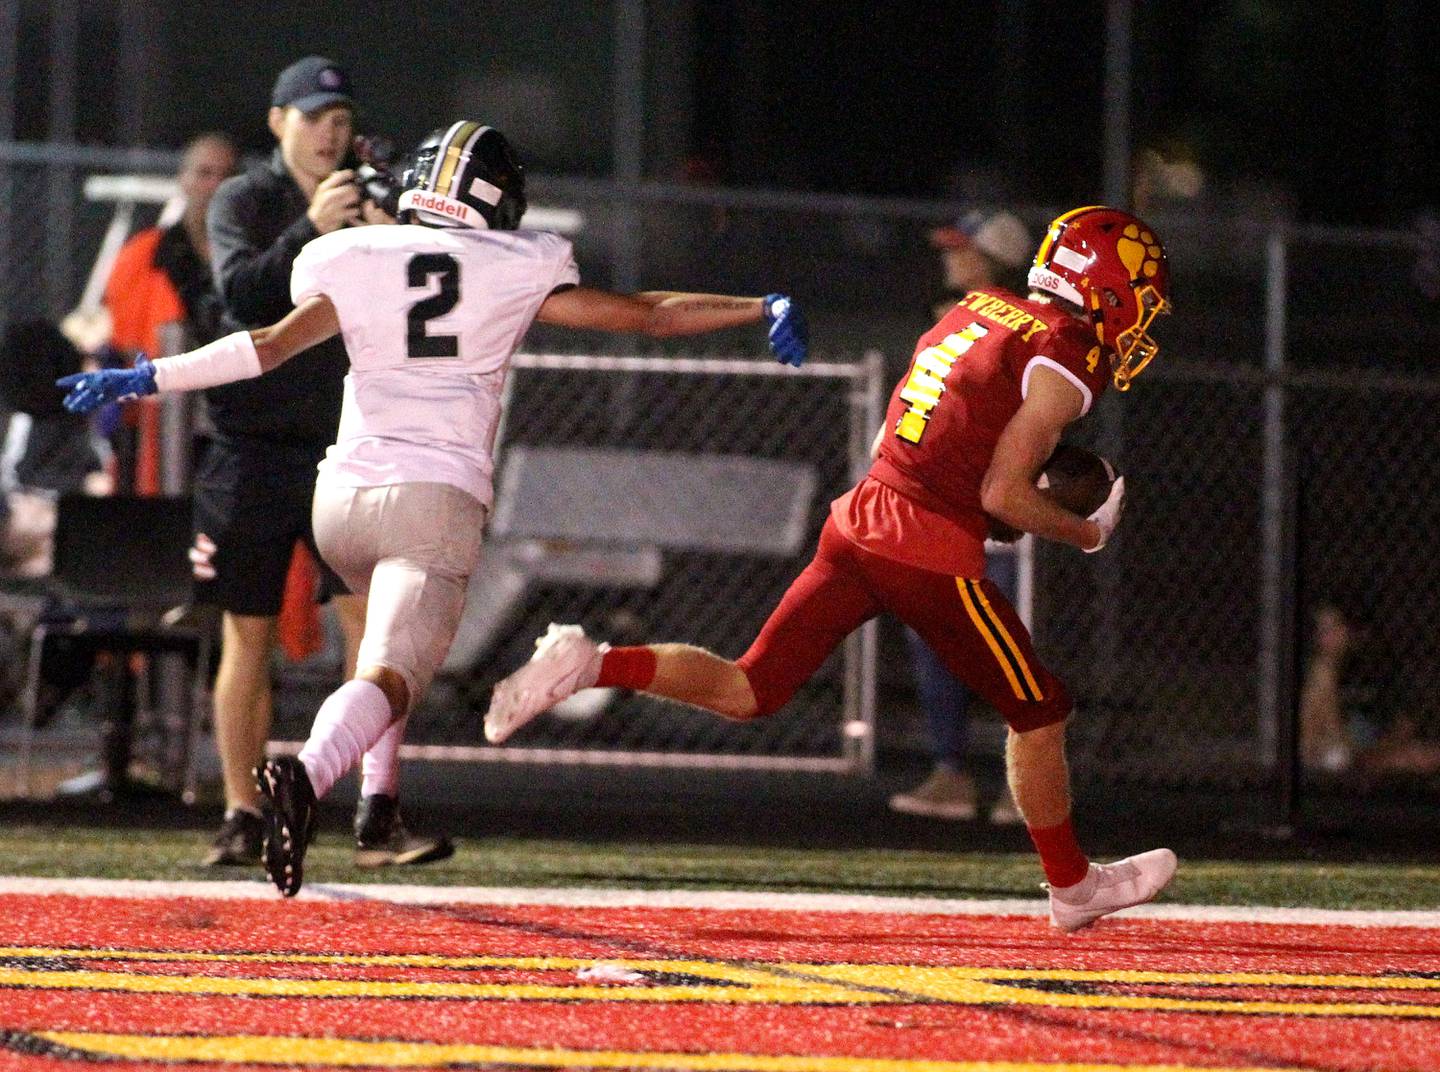 Batavia's Eric Newberry (4) scores a touchdown during a home game against Glenbard North on Friday, Sept. 24, 2021.